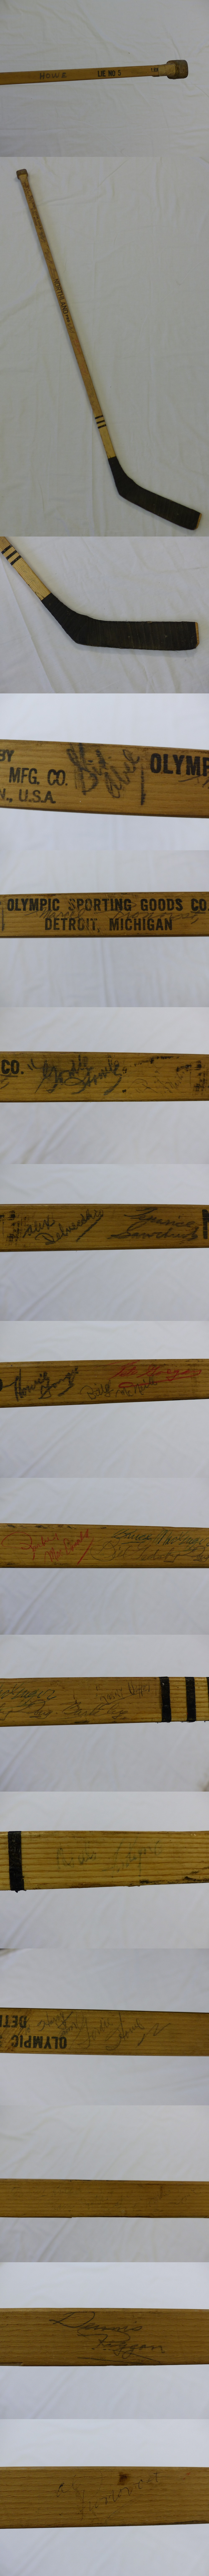 1962-63 DETROIT RED WINGS G. HOWE GAME USED STICK TEAM AUTOGRAPHED BY 22 photo